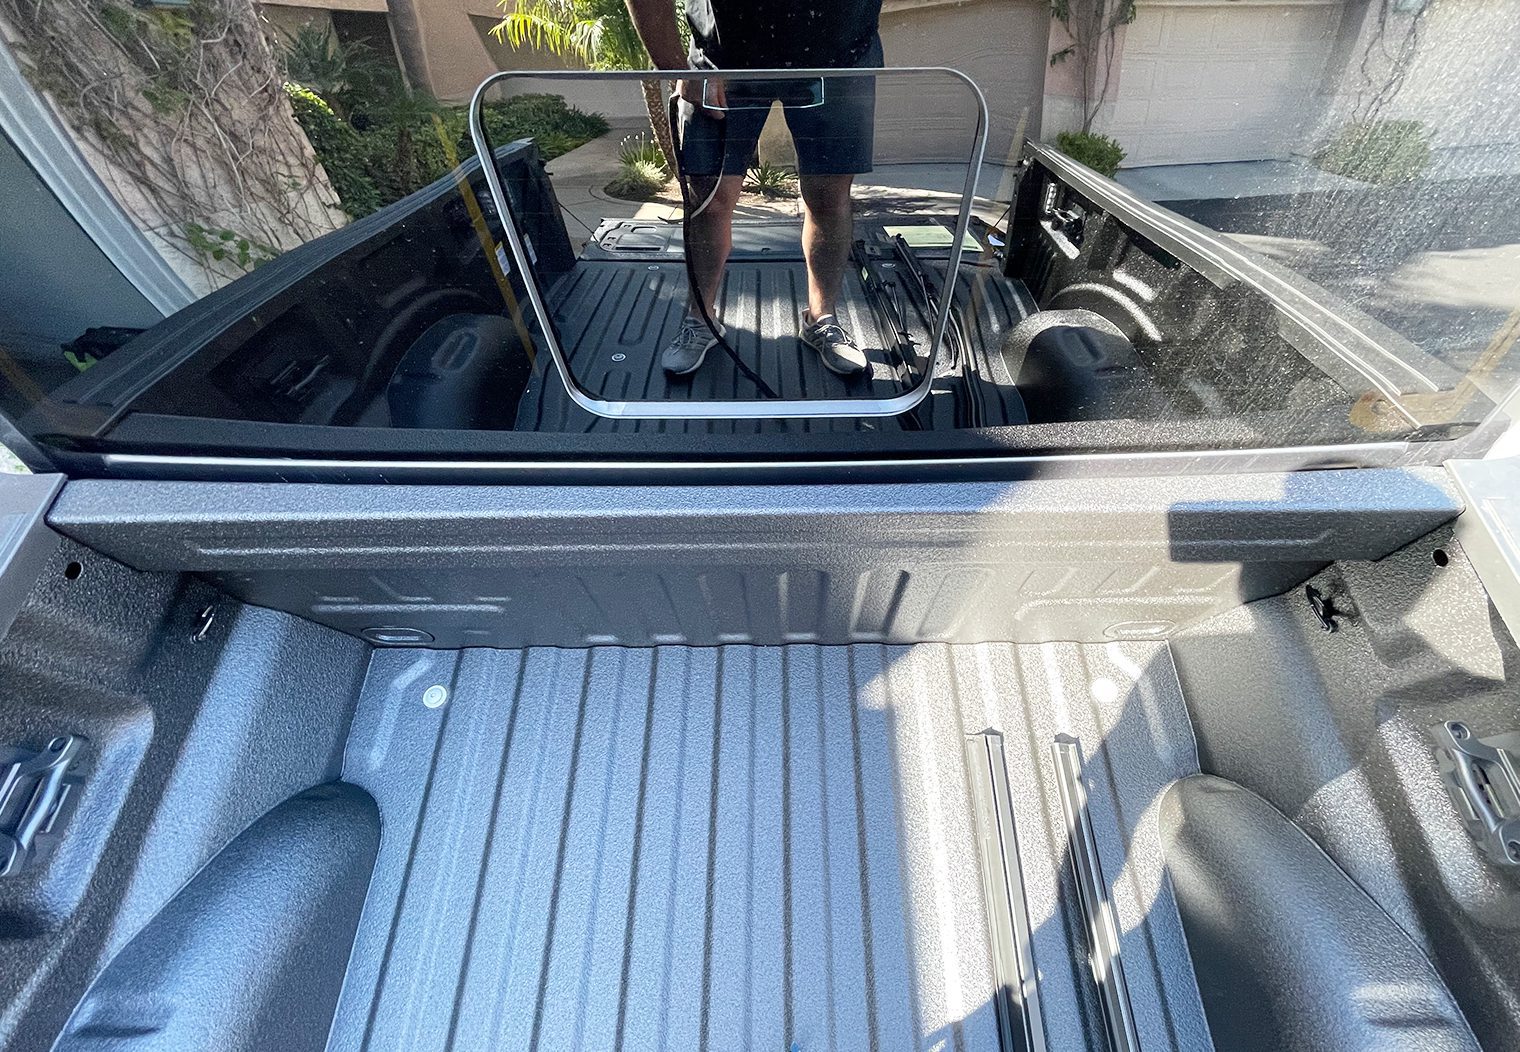 Front of 2021 F150 bed before installing adhesive sealing strip for tonneau cover